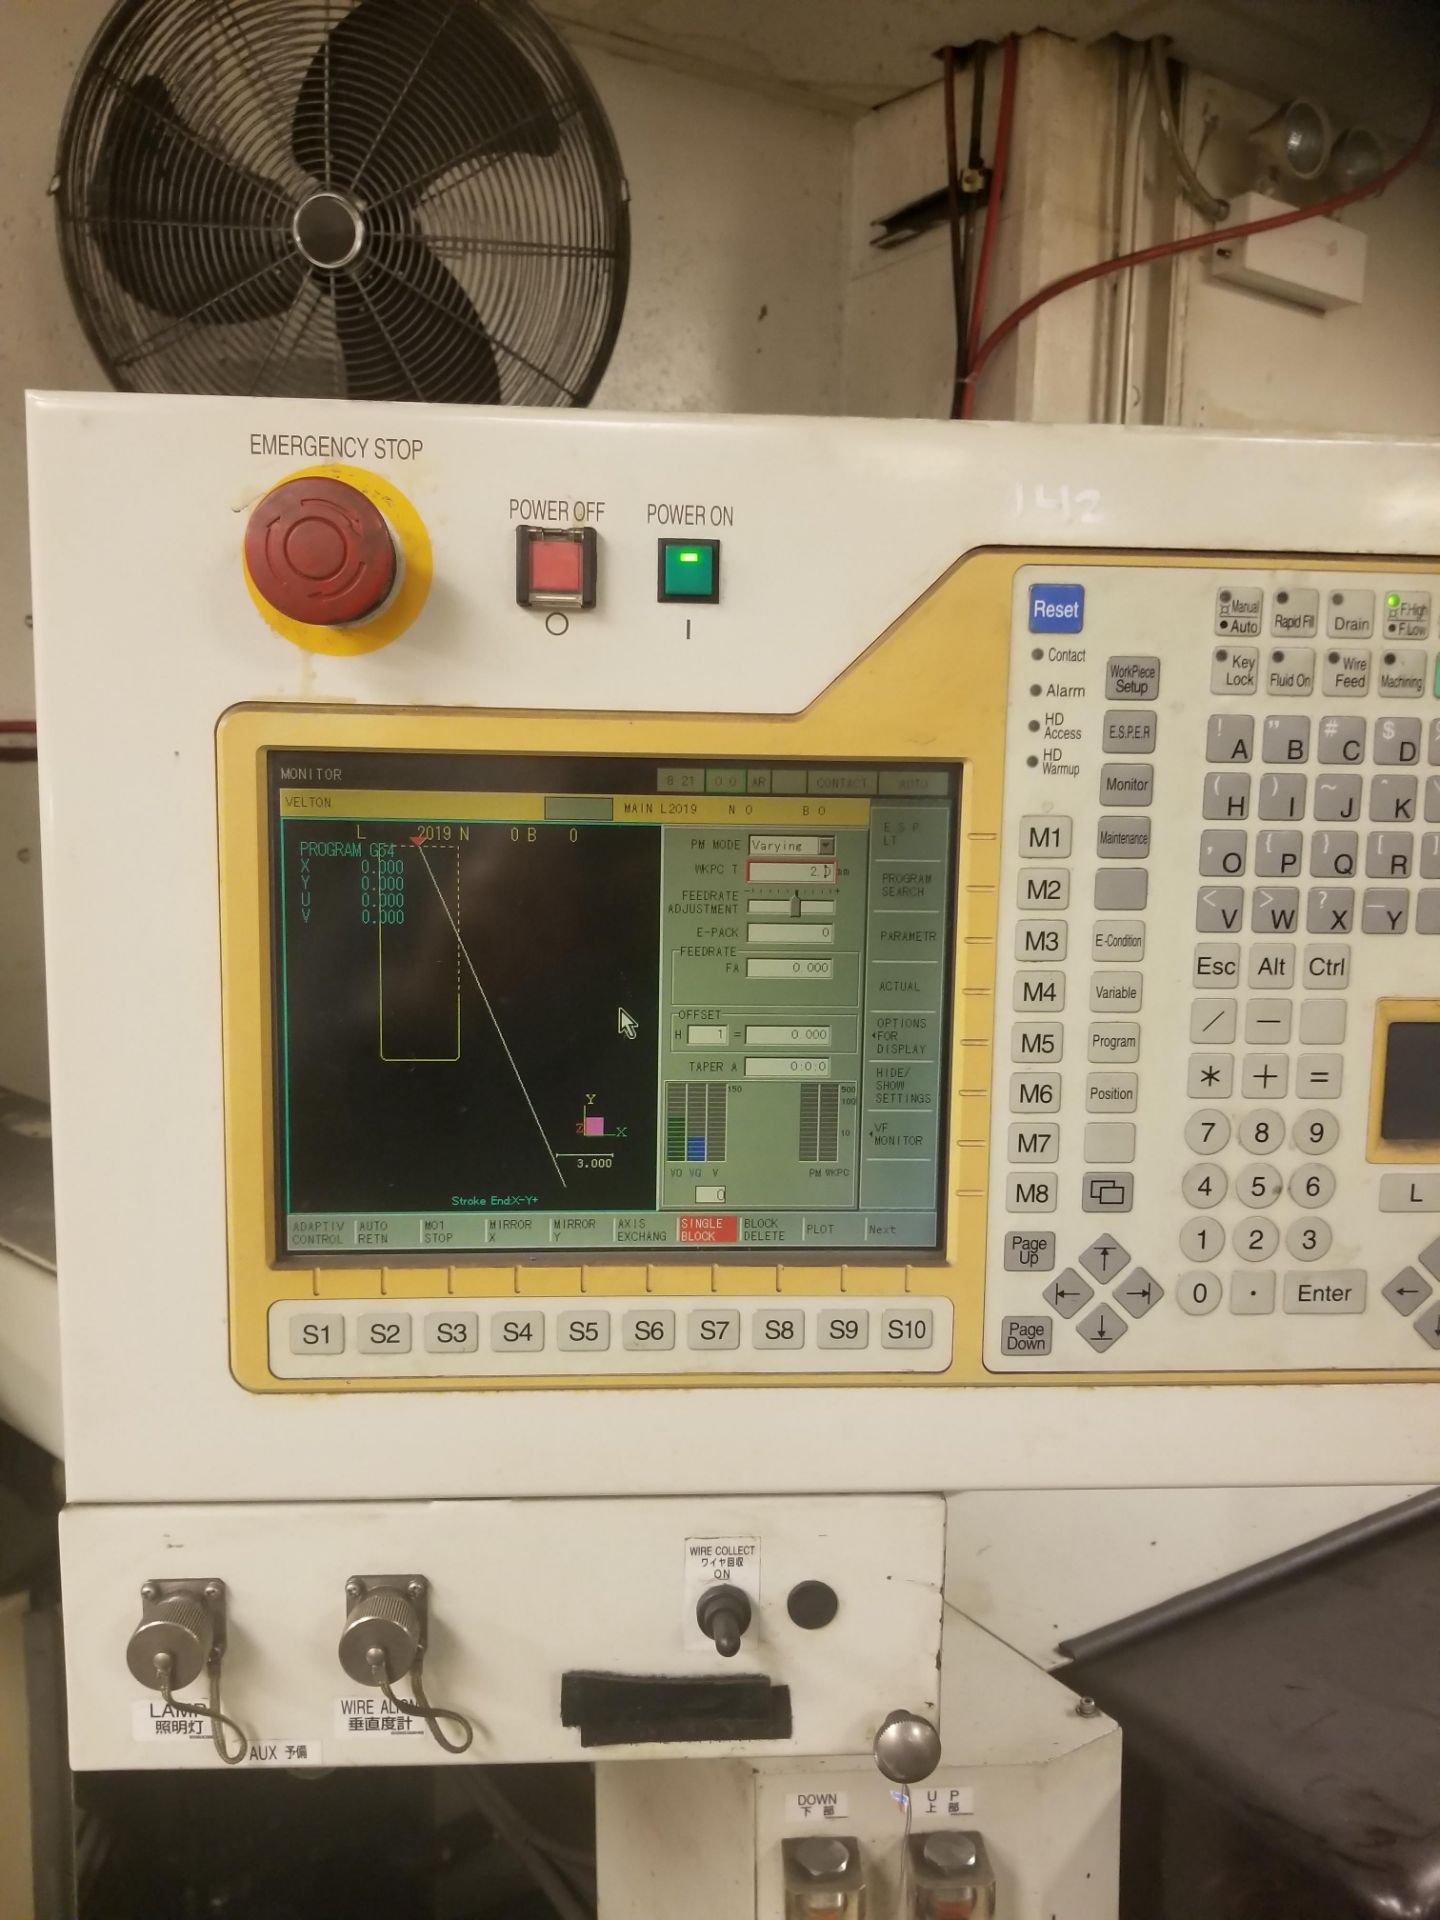 Mitsubishi Model RA90 CNC Wire EDM Machine with Auto Threading, X-Axis 12.6" Travel, Y-Axis 9.8", - Image 6 of 8